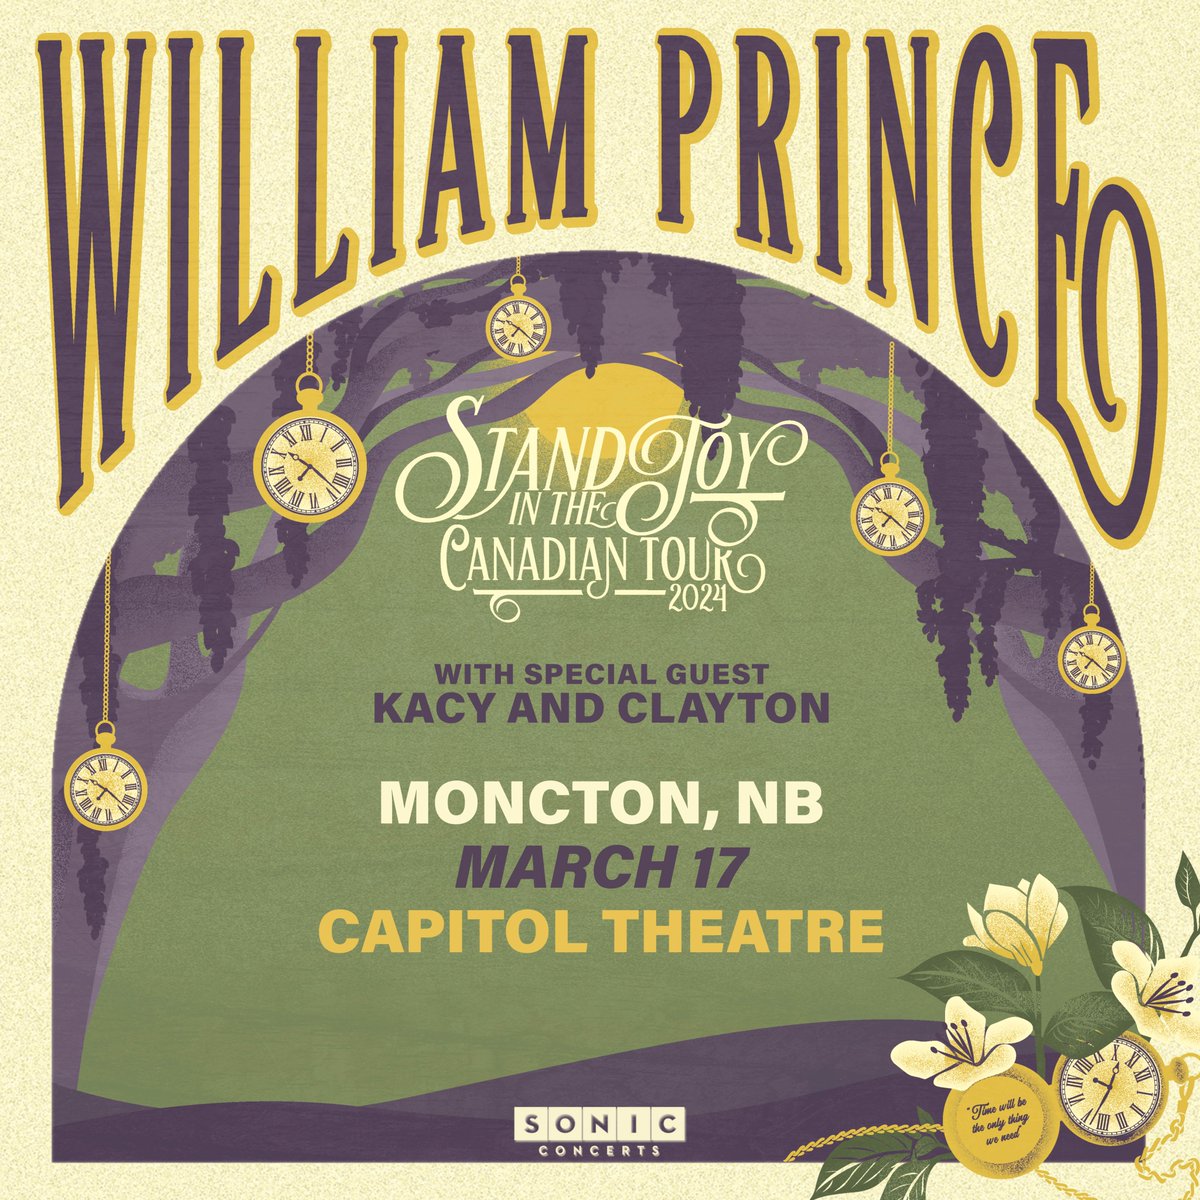 This Sunday at @CapitolMoncton! Don't miss @WilliamPrince with special guest @kacyandclayton. Buy 🎟️ now: capitol.nb.ca/en/william-pri…